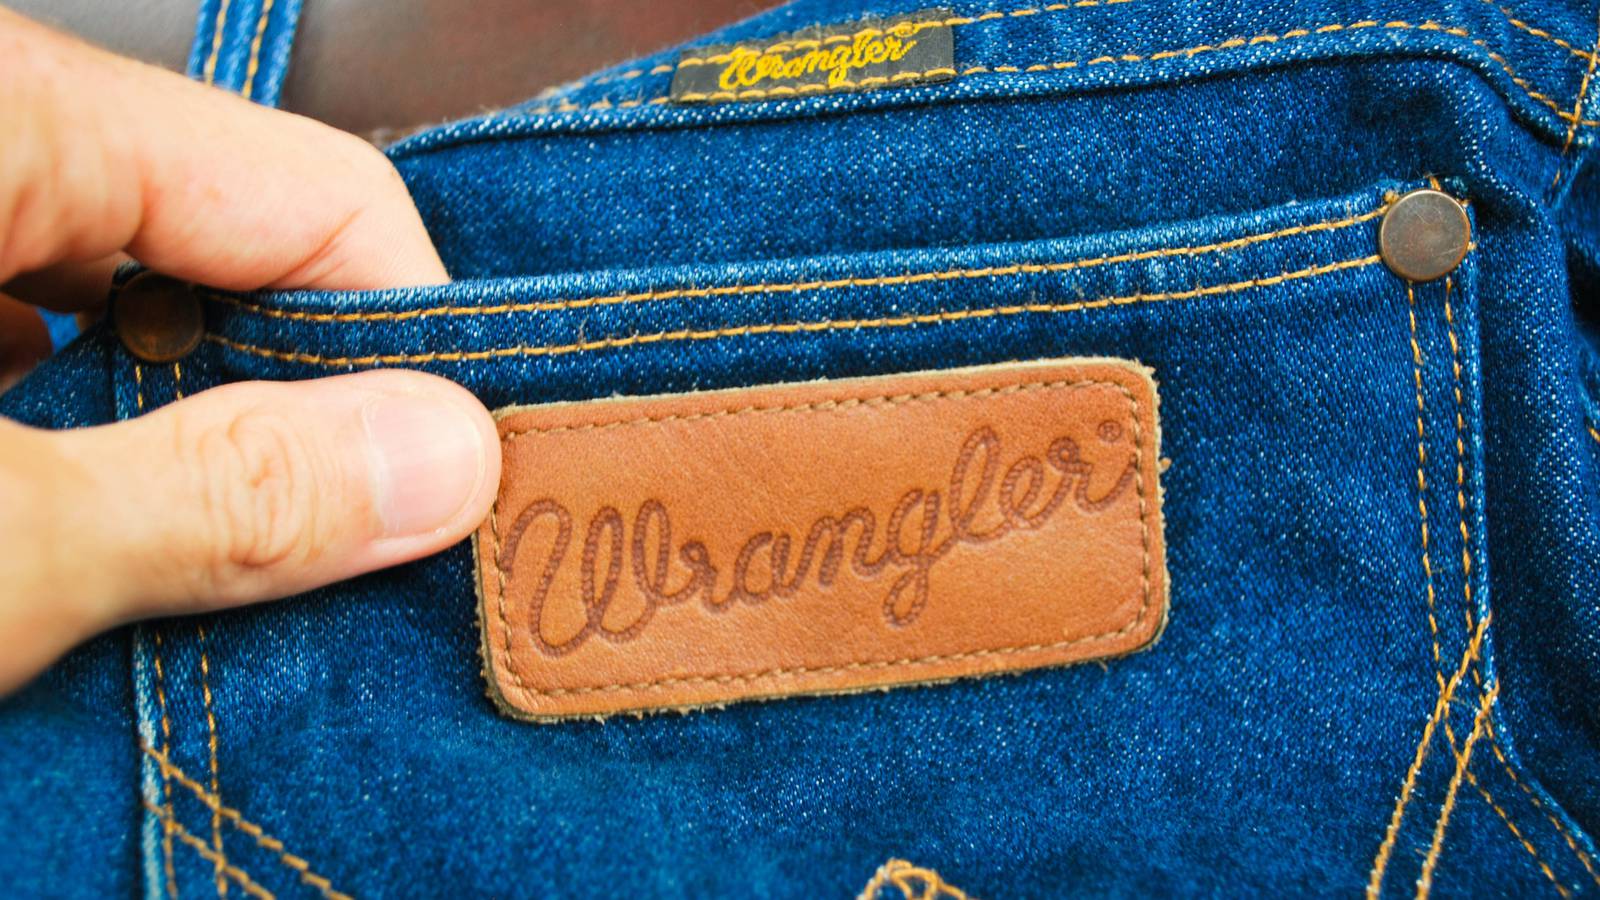 West Op maat Wereldrecord Guinness Book Wrangler Jeans Are Headed to China | BoF